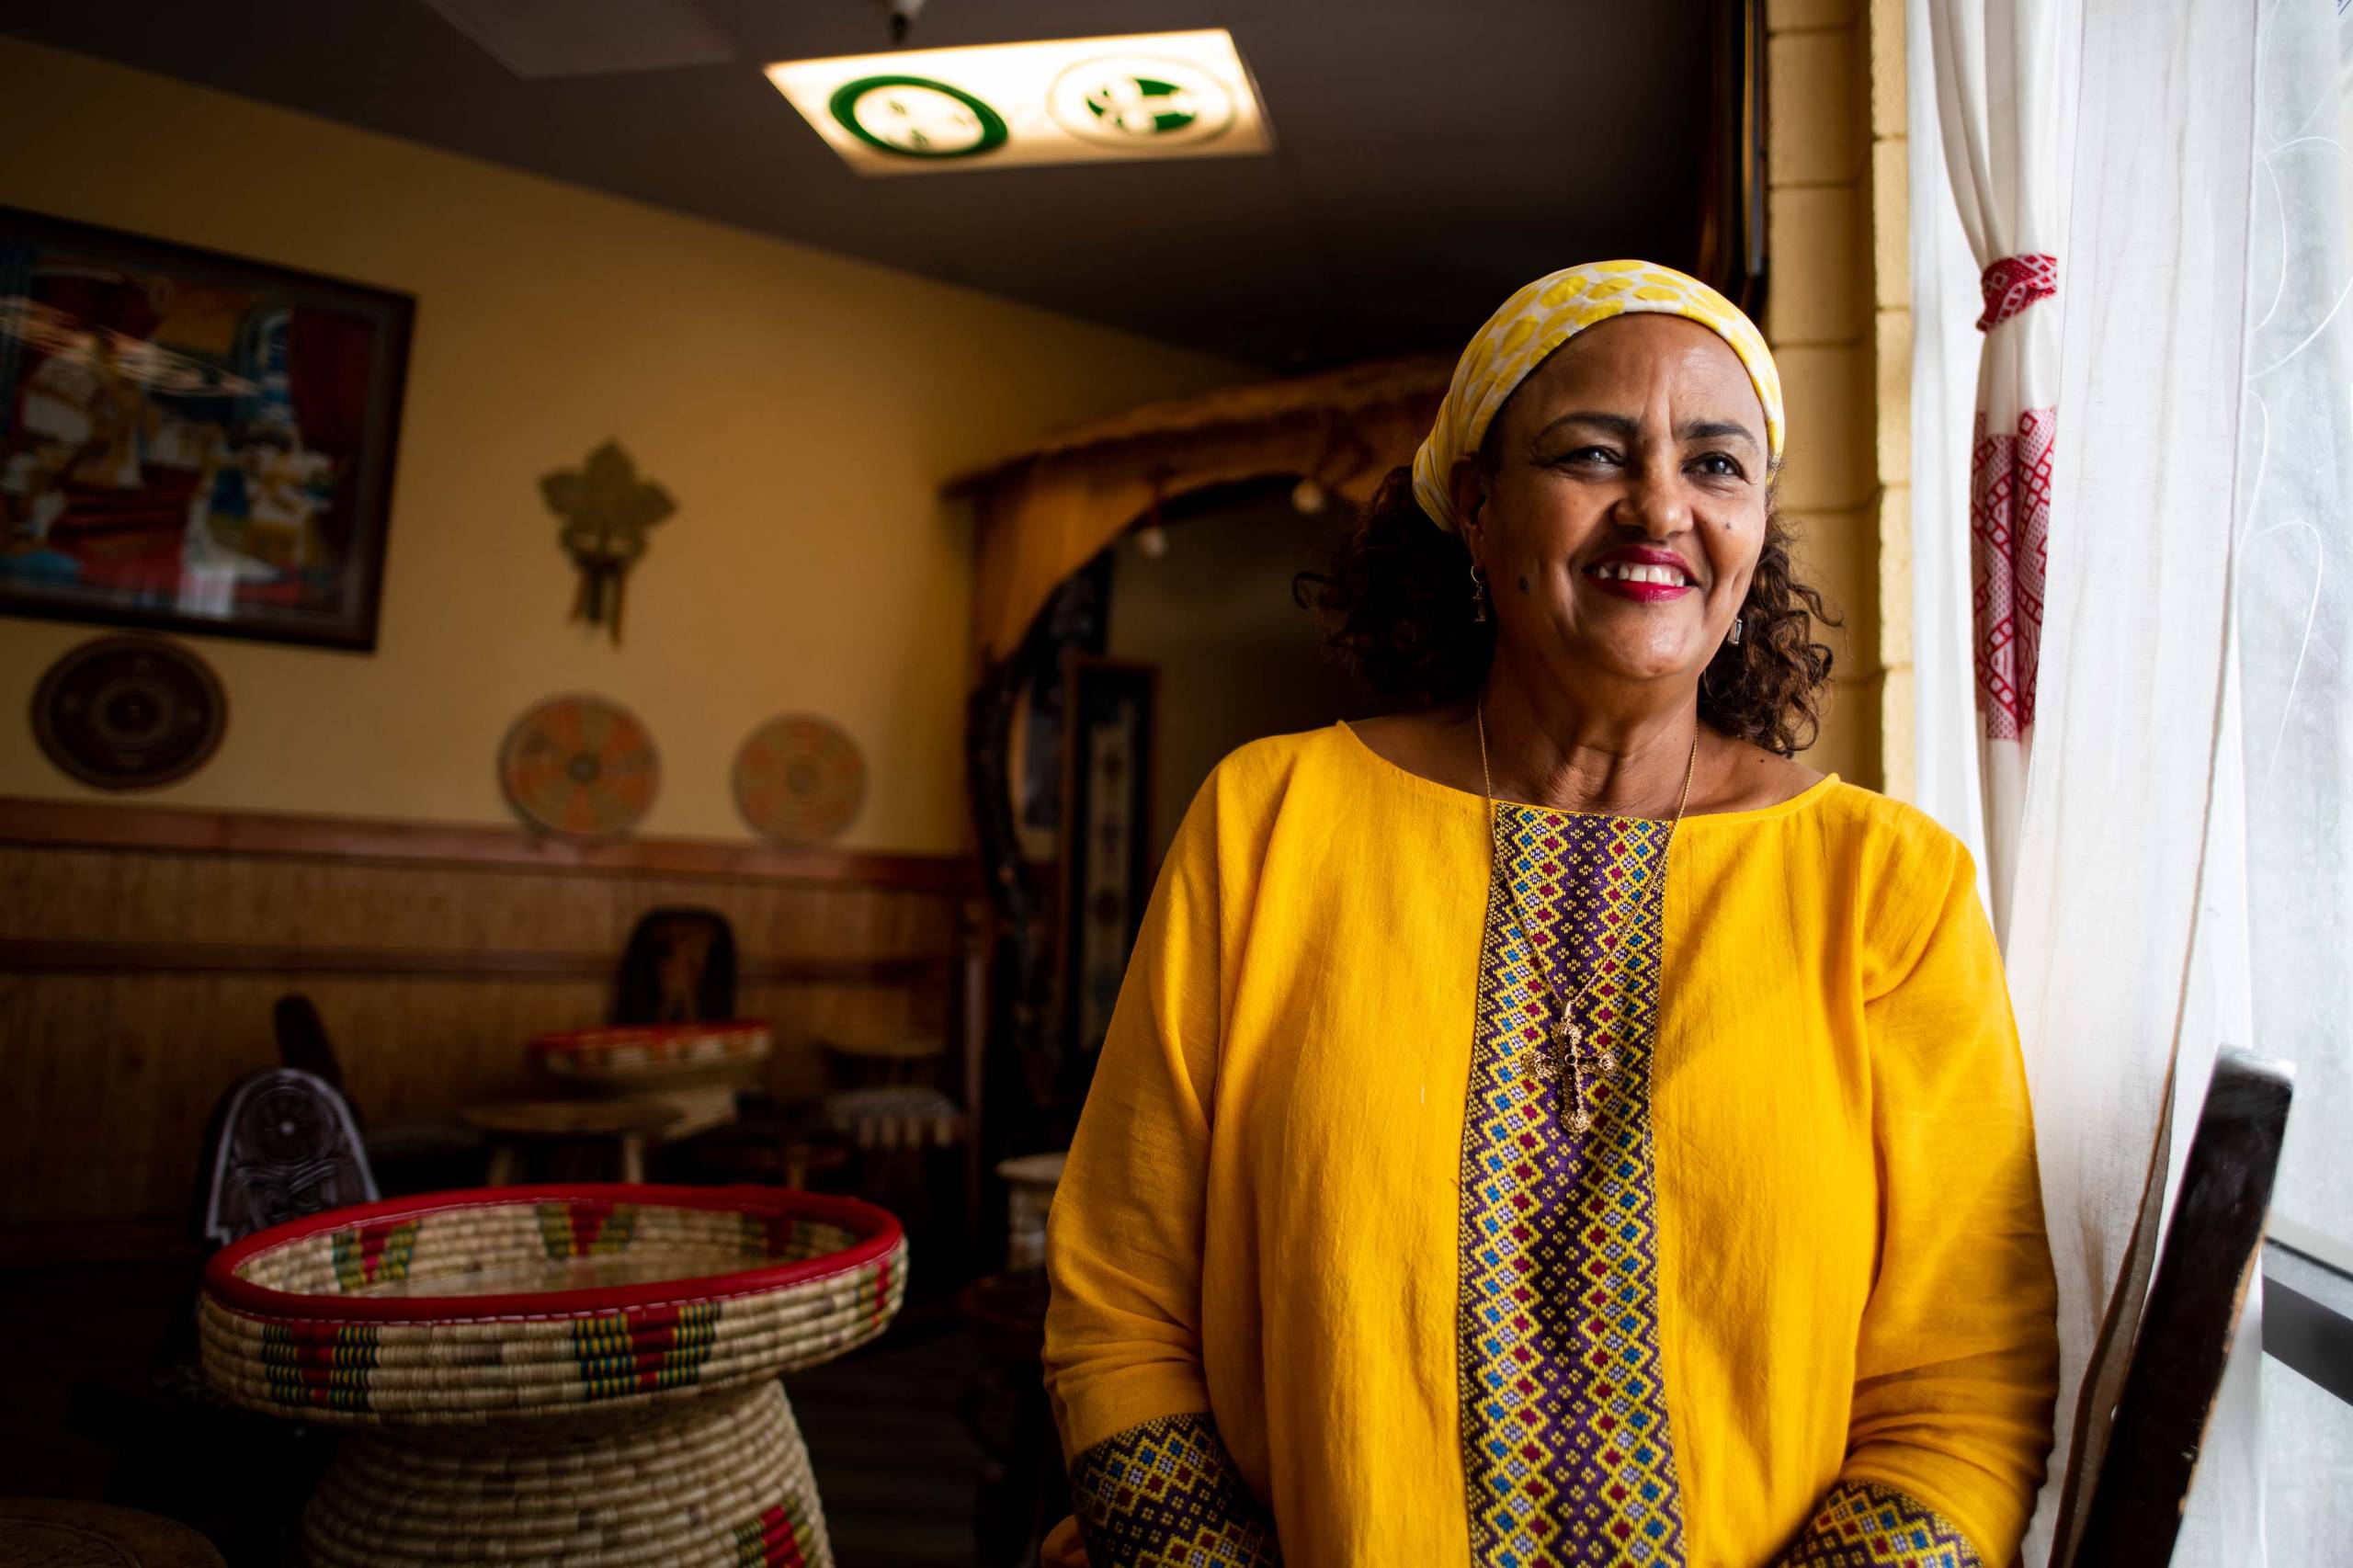 A woman in a bright yellow dress poses for a portrait inside her restaurant.